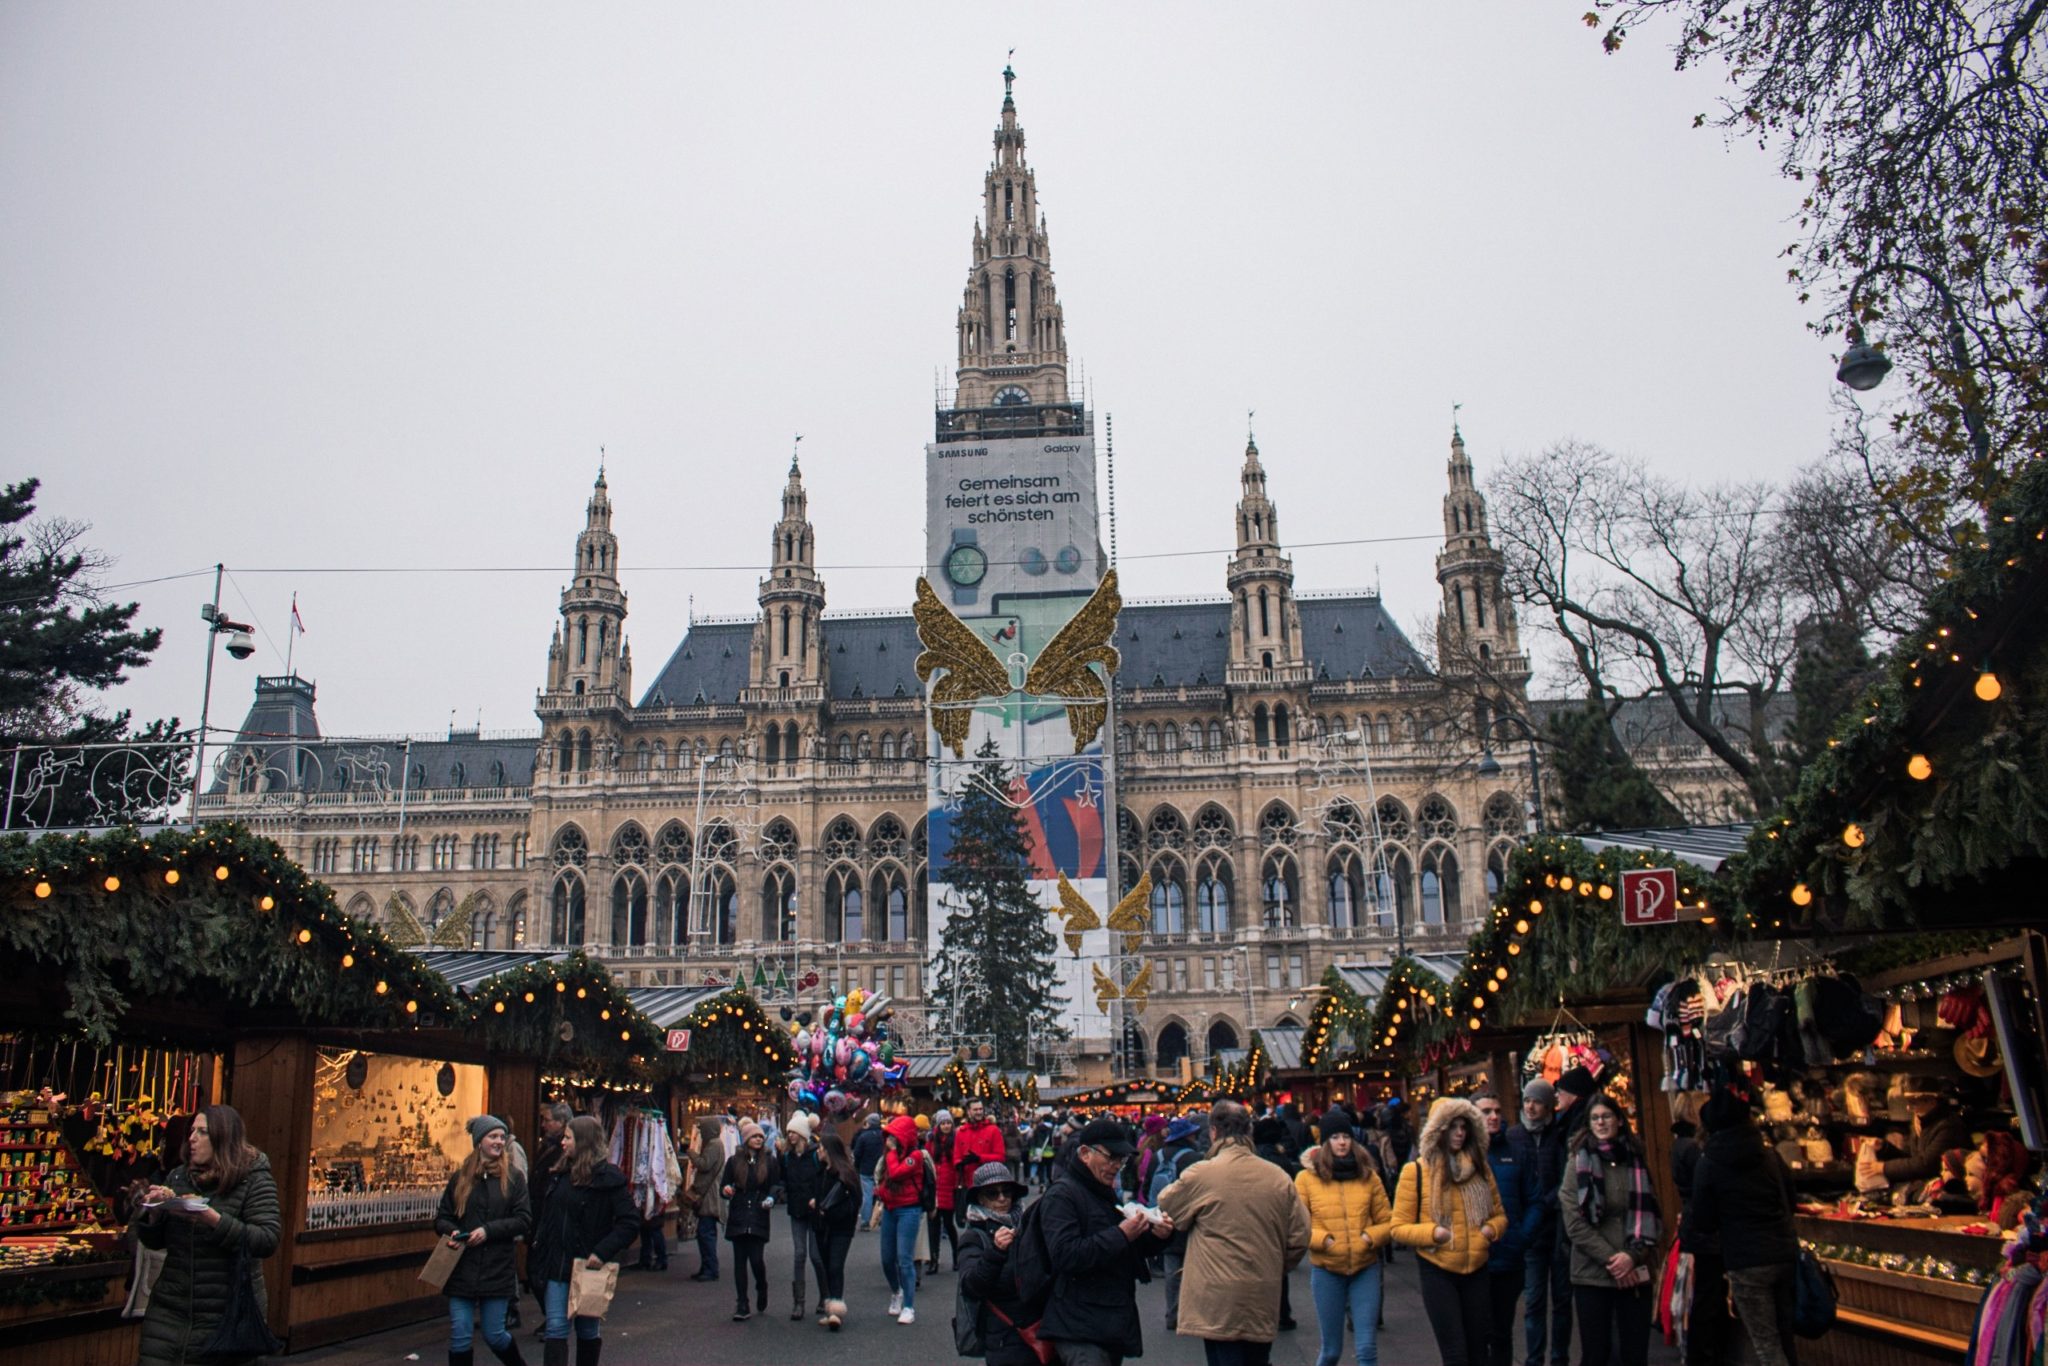 View of the Christmas Market booths at Rathausplatz